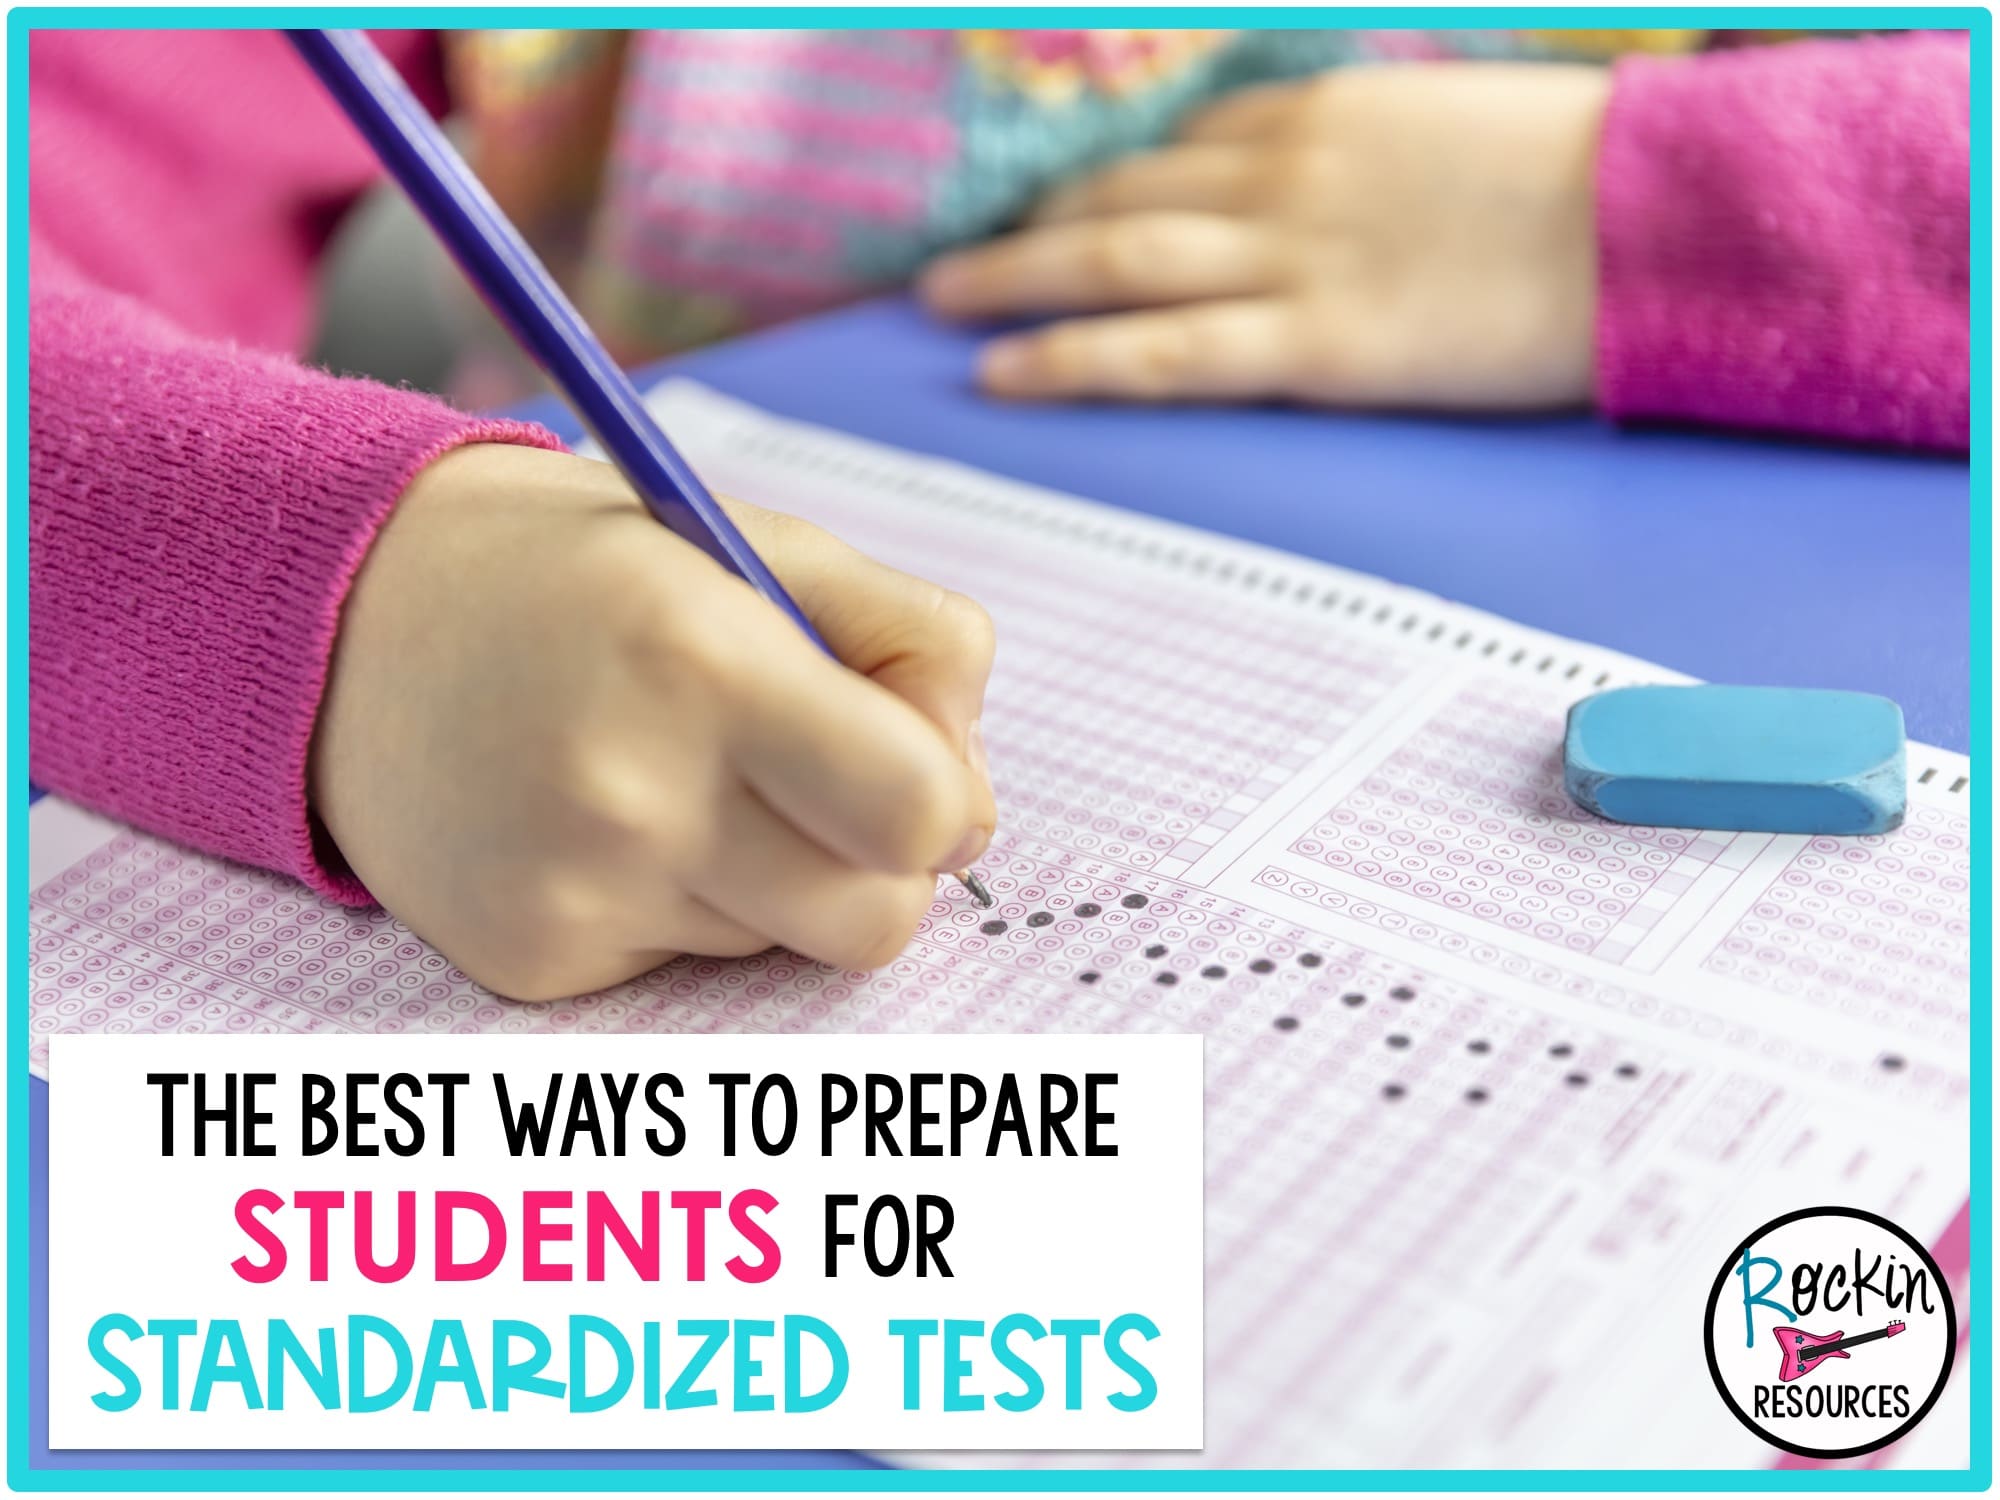 The Best Ways to Prepare Students for Standardized Tests